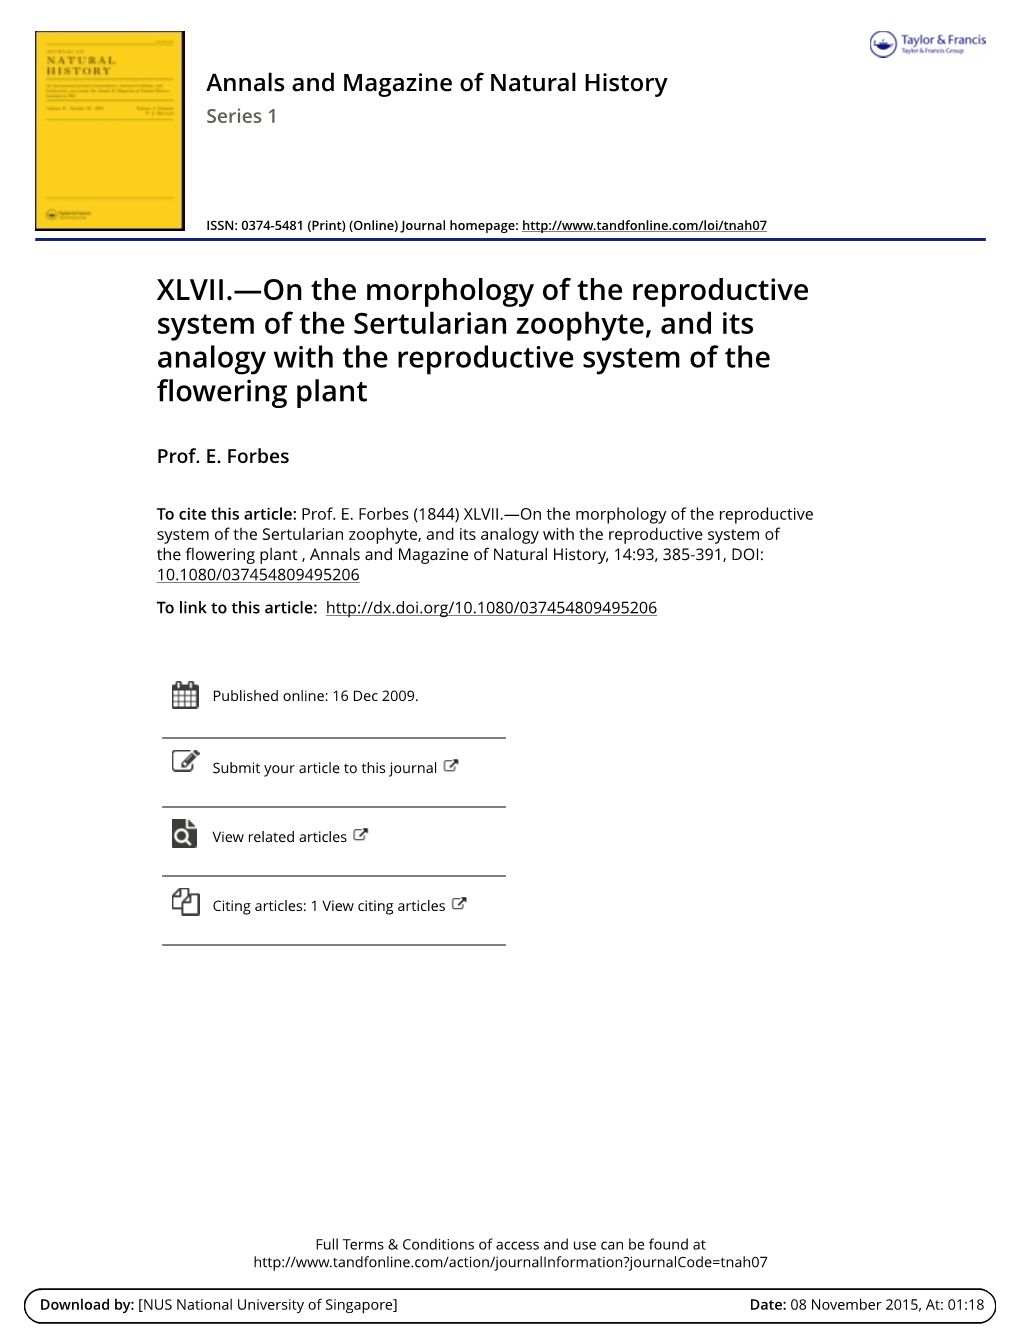 On the Morphology of the Reproductive System of the Sertularian Zoophyte, and Its Analogy with the Reproductive System of the Flowering Plant